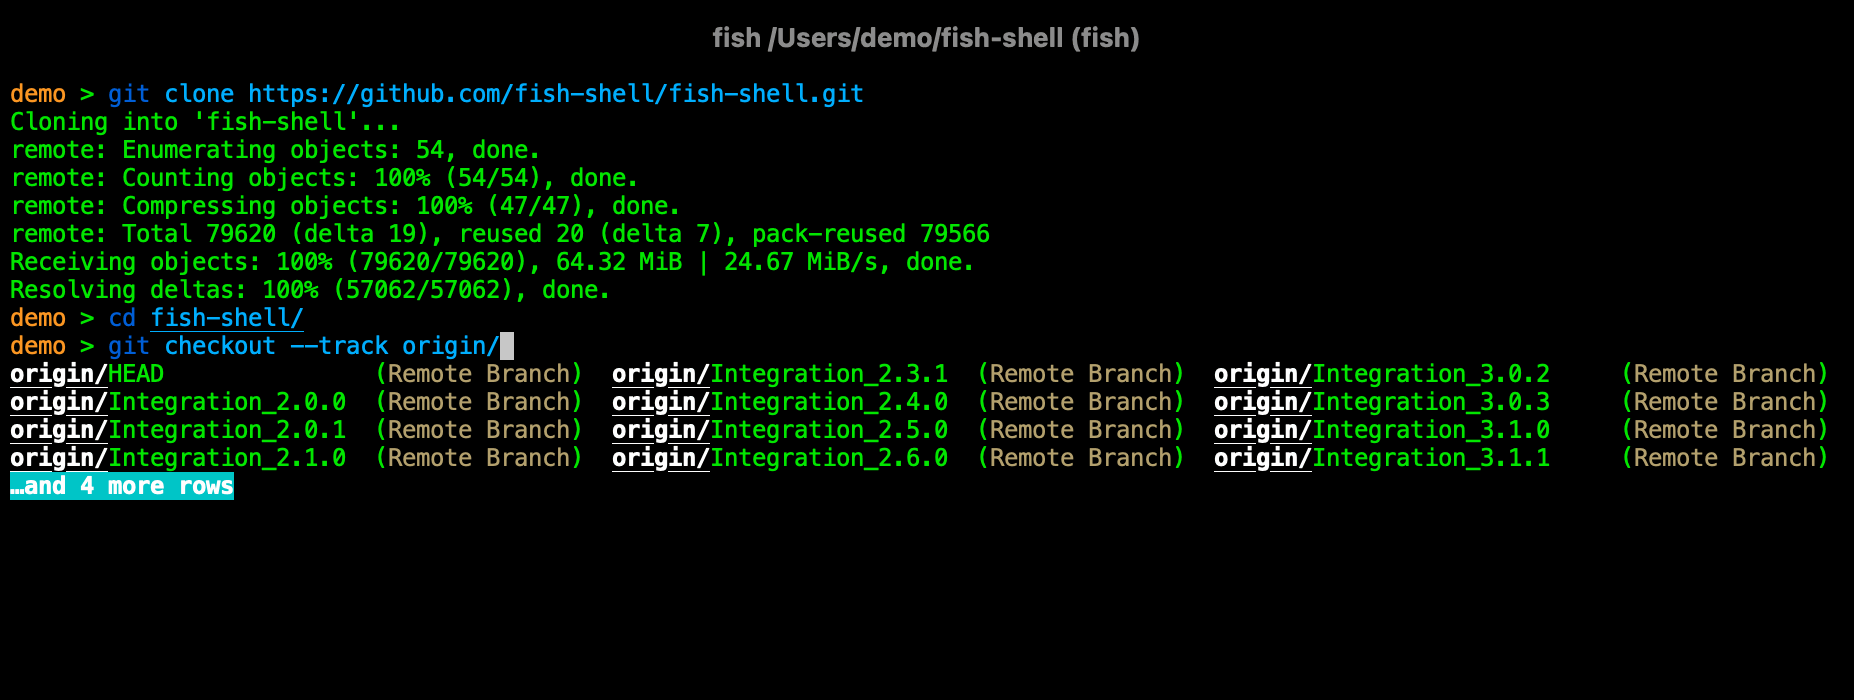 A git clone followed by the completions for 'git checkout --track origin/', showing the origin's remote branches